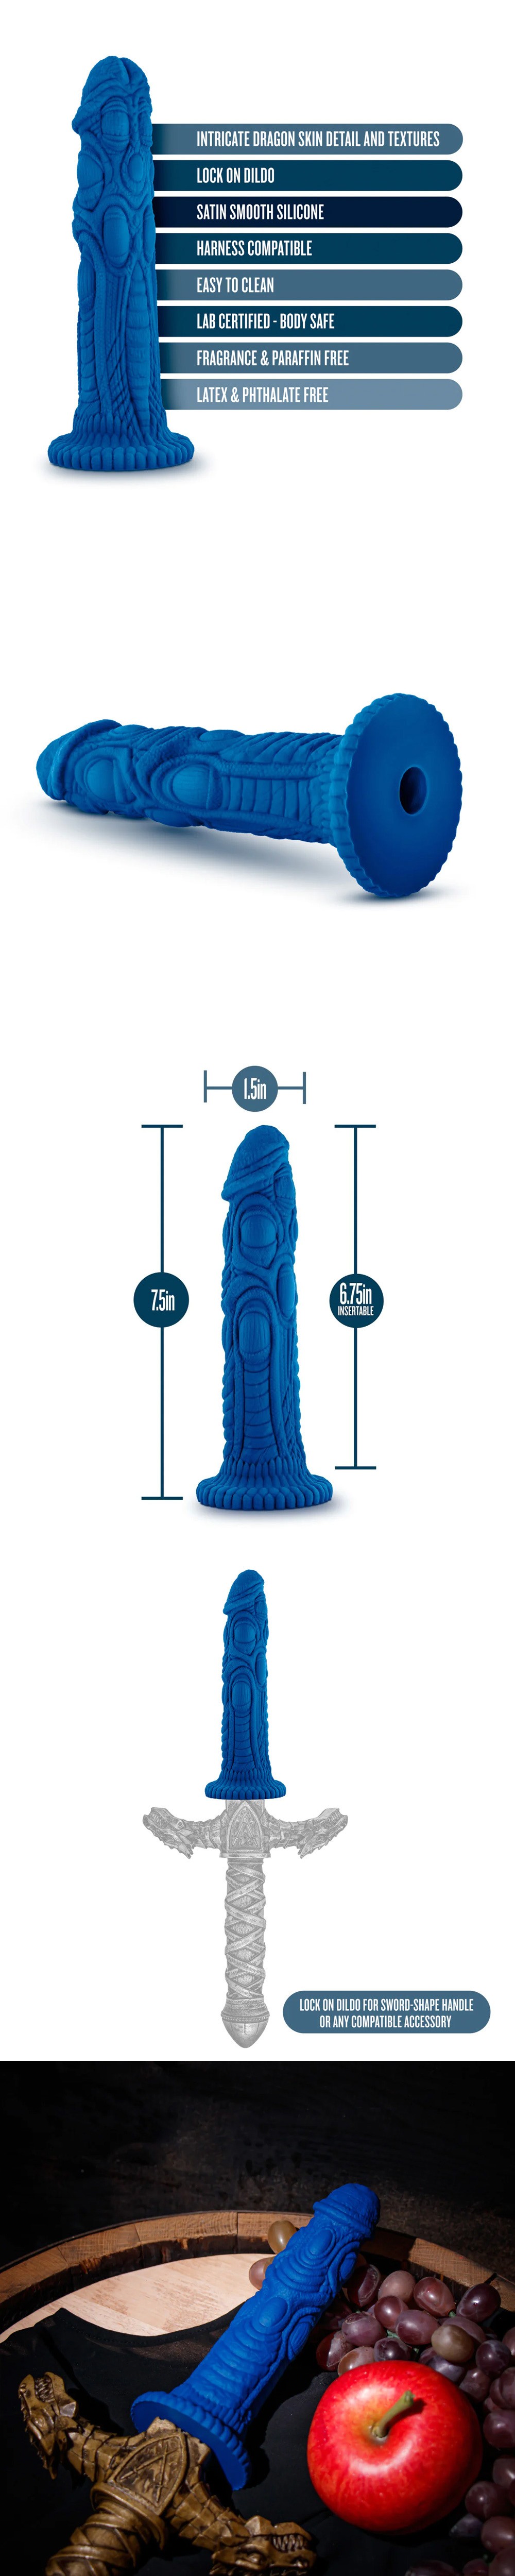 Blush The Realm Draken Blue 7.5-Inch Dildo With Suction Cup